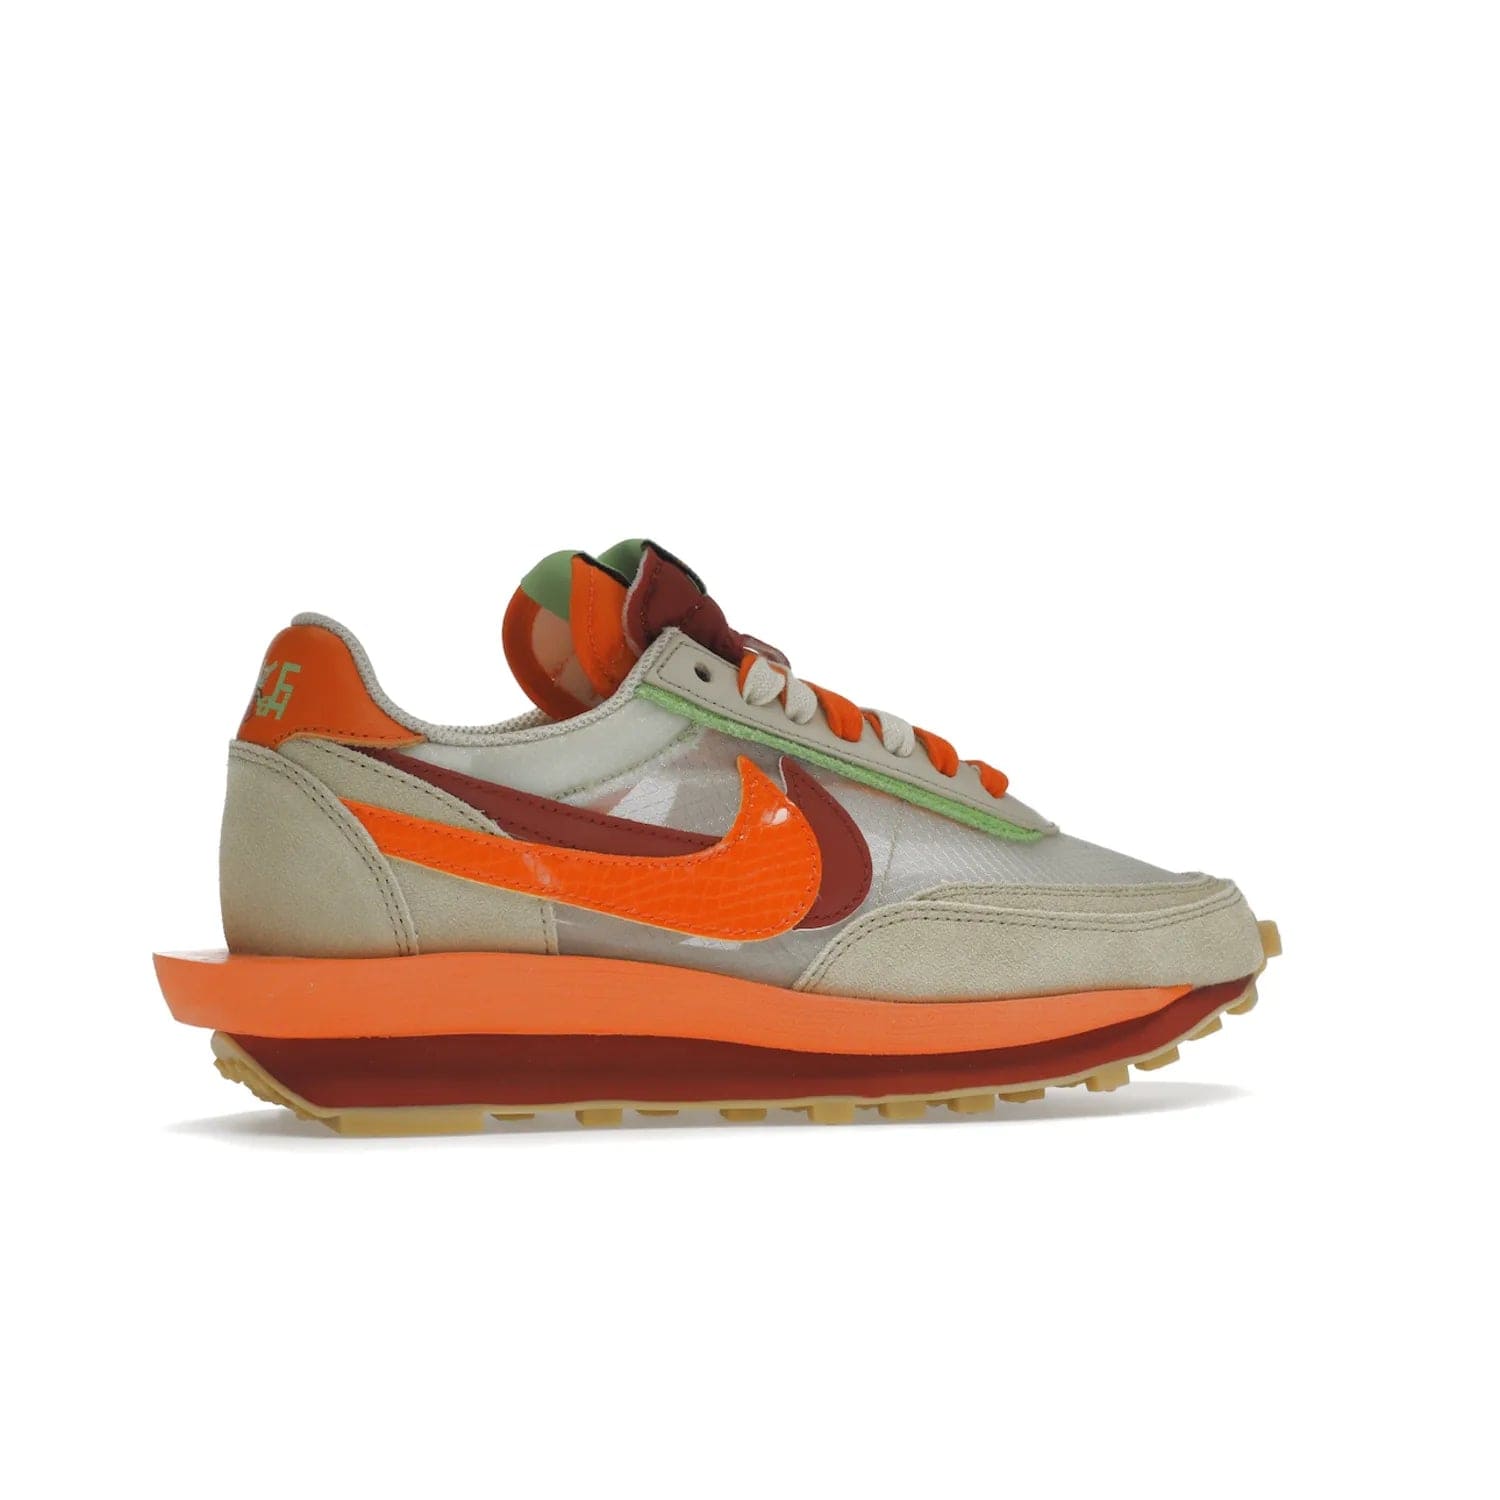 Nike LD Waffle sacai CLOT Kiss of Death Net Orange Blaze - Image 35 - Only at www.BallersClubKickz.com - A bold and stylish Nike LD Waffle sacai CLOT Kiss of Death Net Orange Blaze sneaker featuring a unique off-white, Deep Red & Orange Blaze Swooshes, two-toned stacked sole and doubled tongue. Available in September 2021. Make a statement.